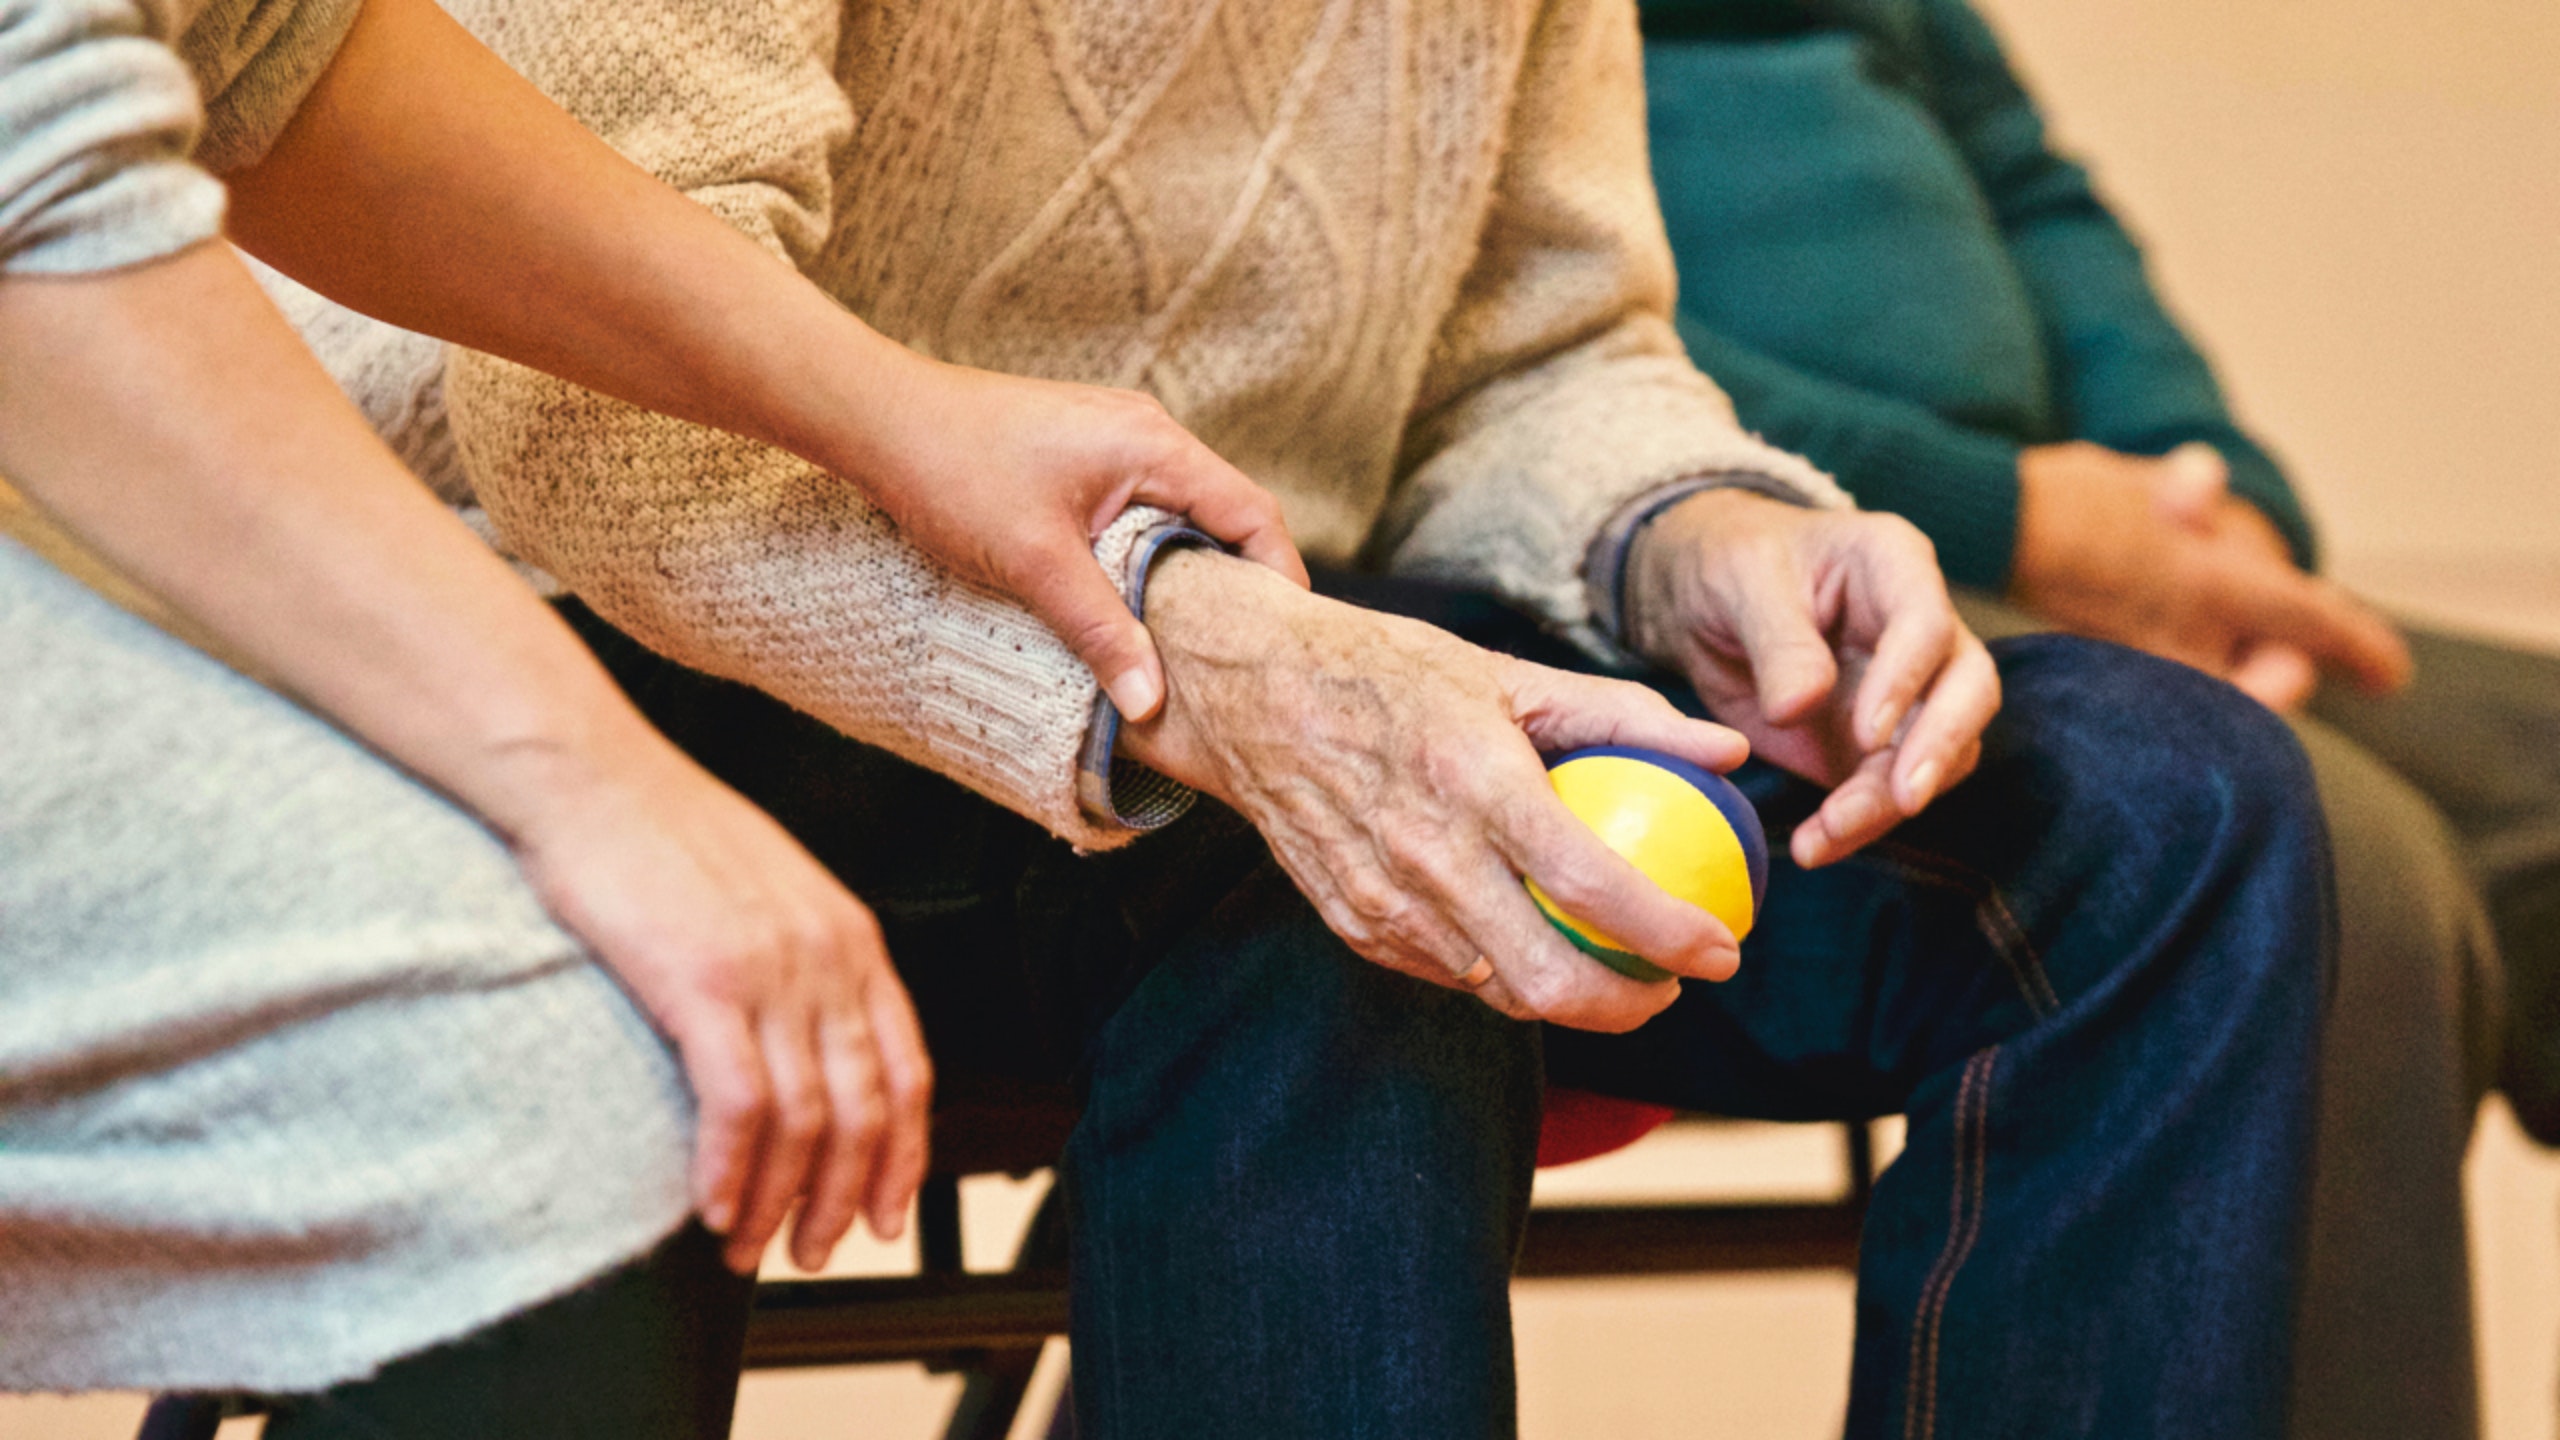 A healthy home: solutions for pain management and comfort in care homes